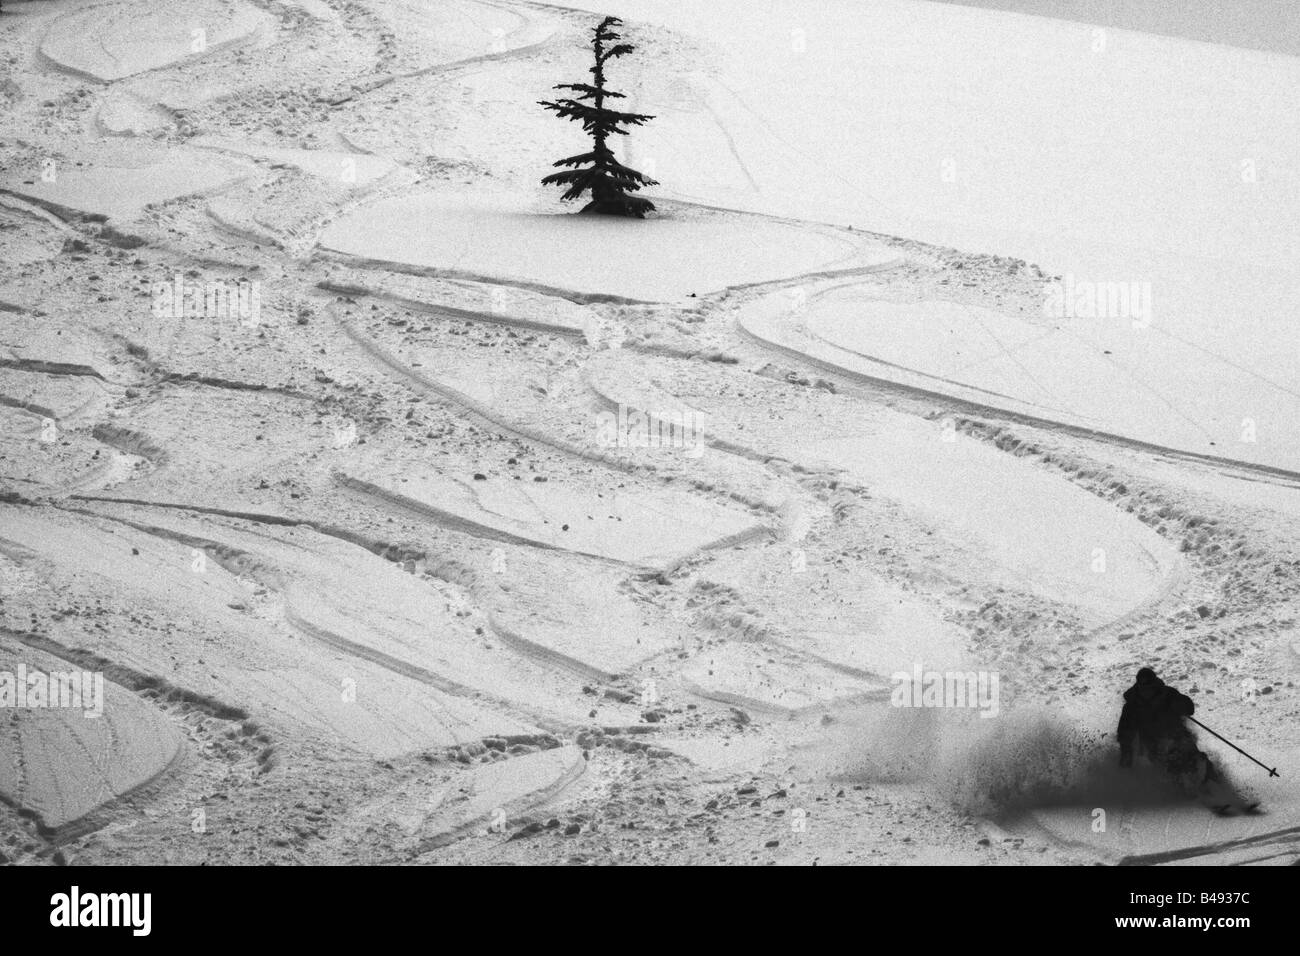 A skier making track in a field of snow with a lone tree Stock Photo